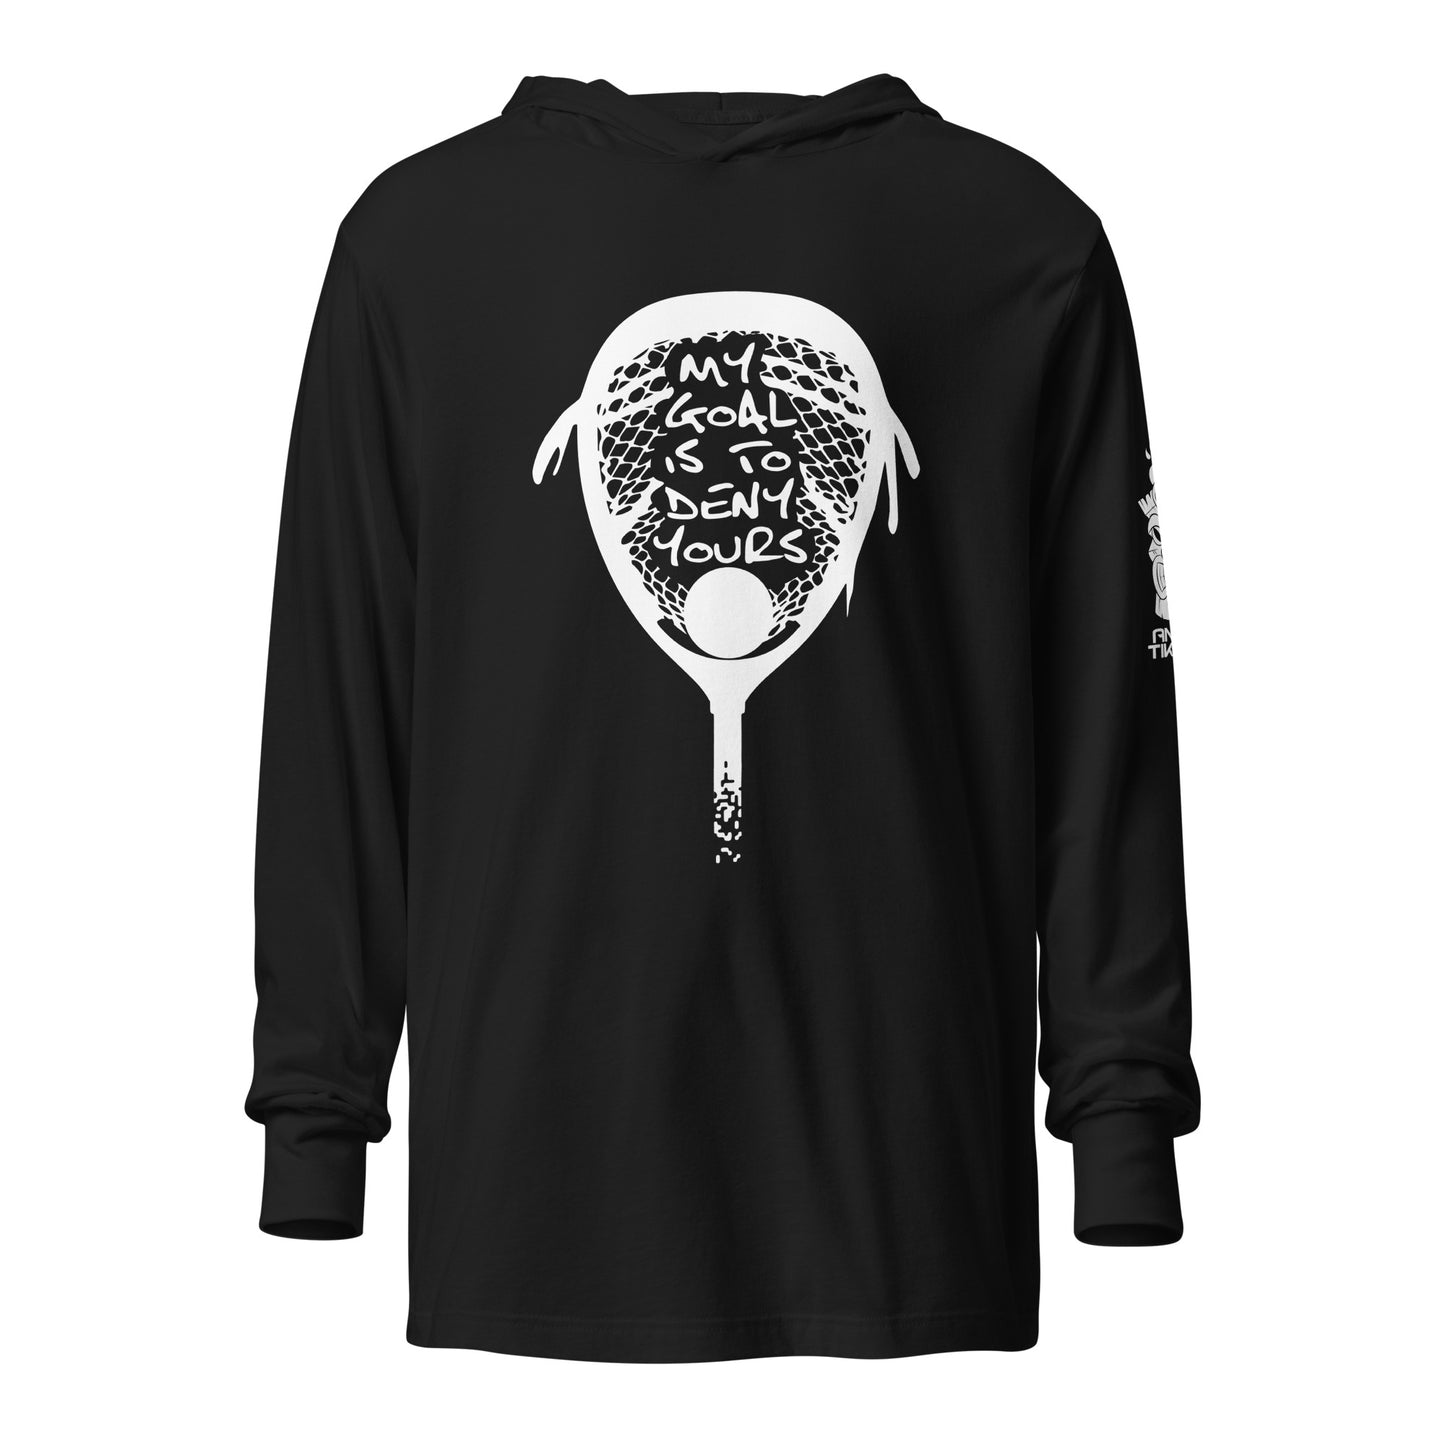 My goal is to deny yours lacrosse Hooded long-sleeve tee